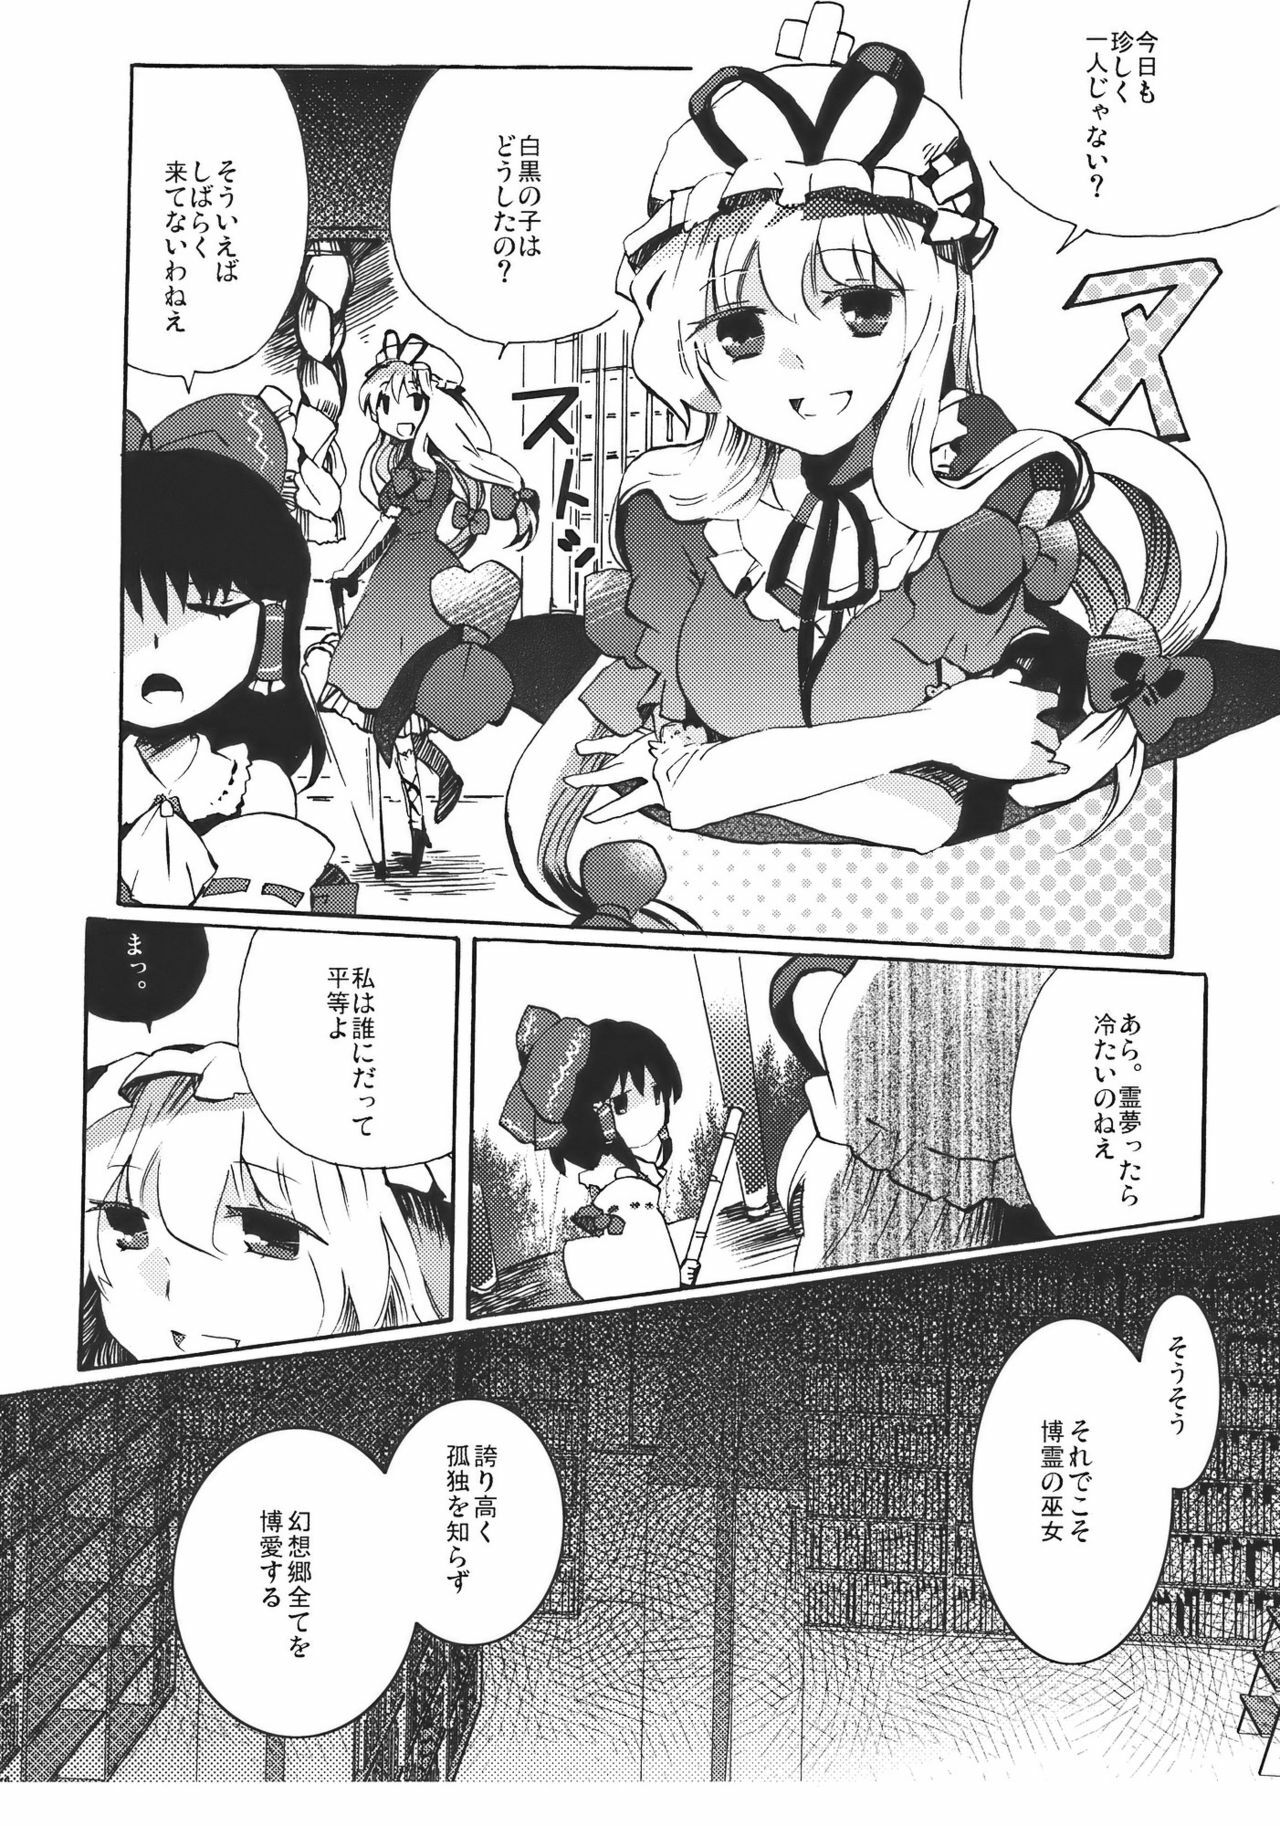 [Oimoto] Yumeiro Dolce (Touhou Project) page 9 full